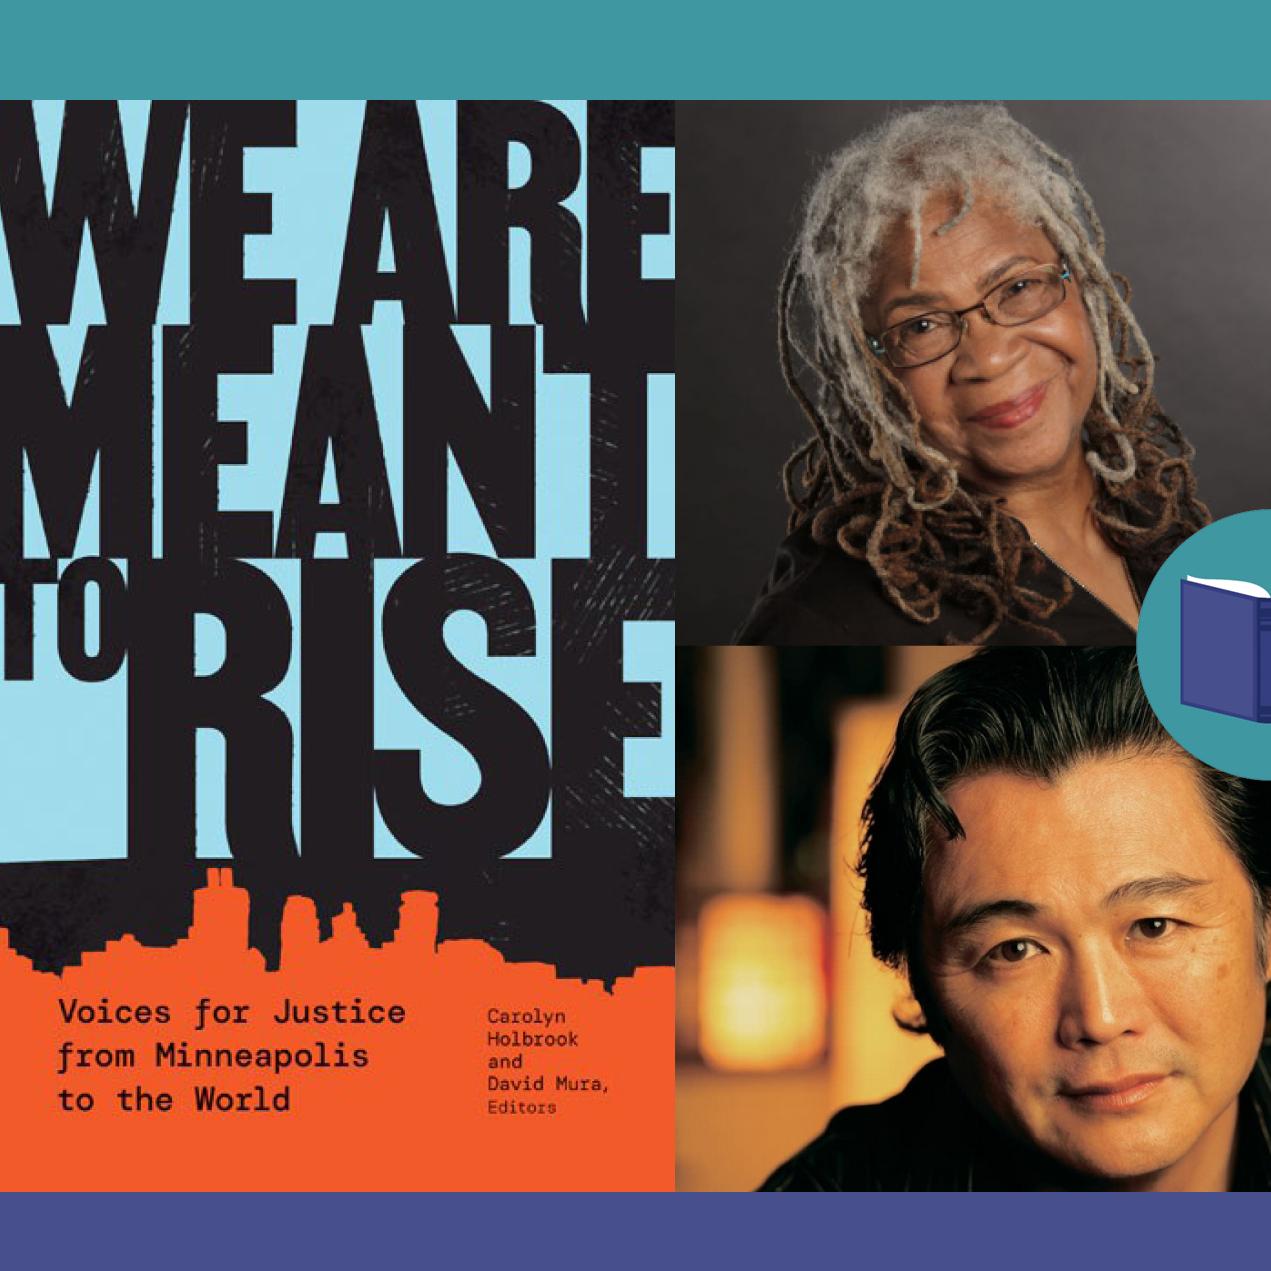 A compound image featuring the book cover for "We Are Meant to Rise" along with headshots of the editors and the One Book | One Minnesota wordmark.